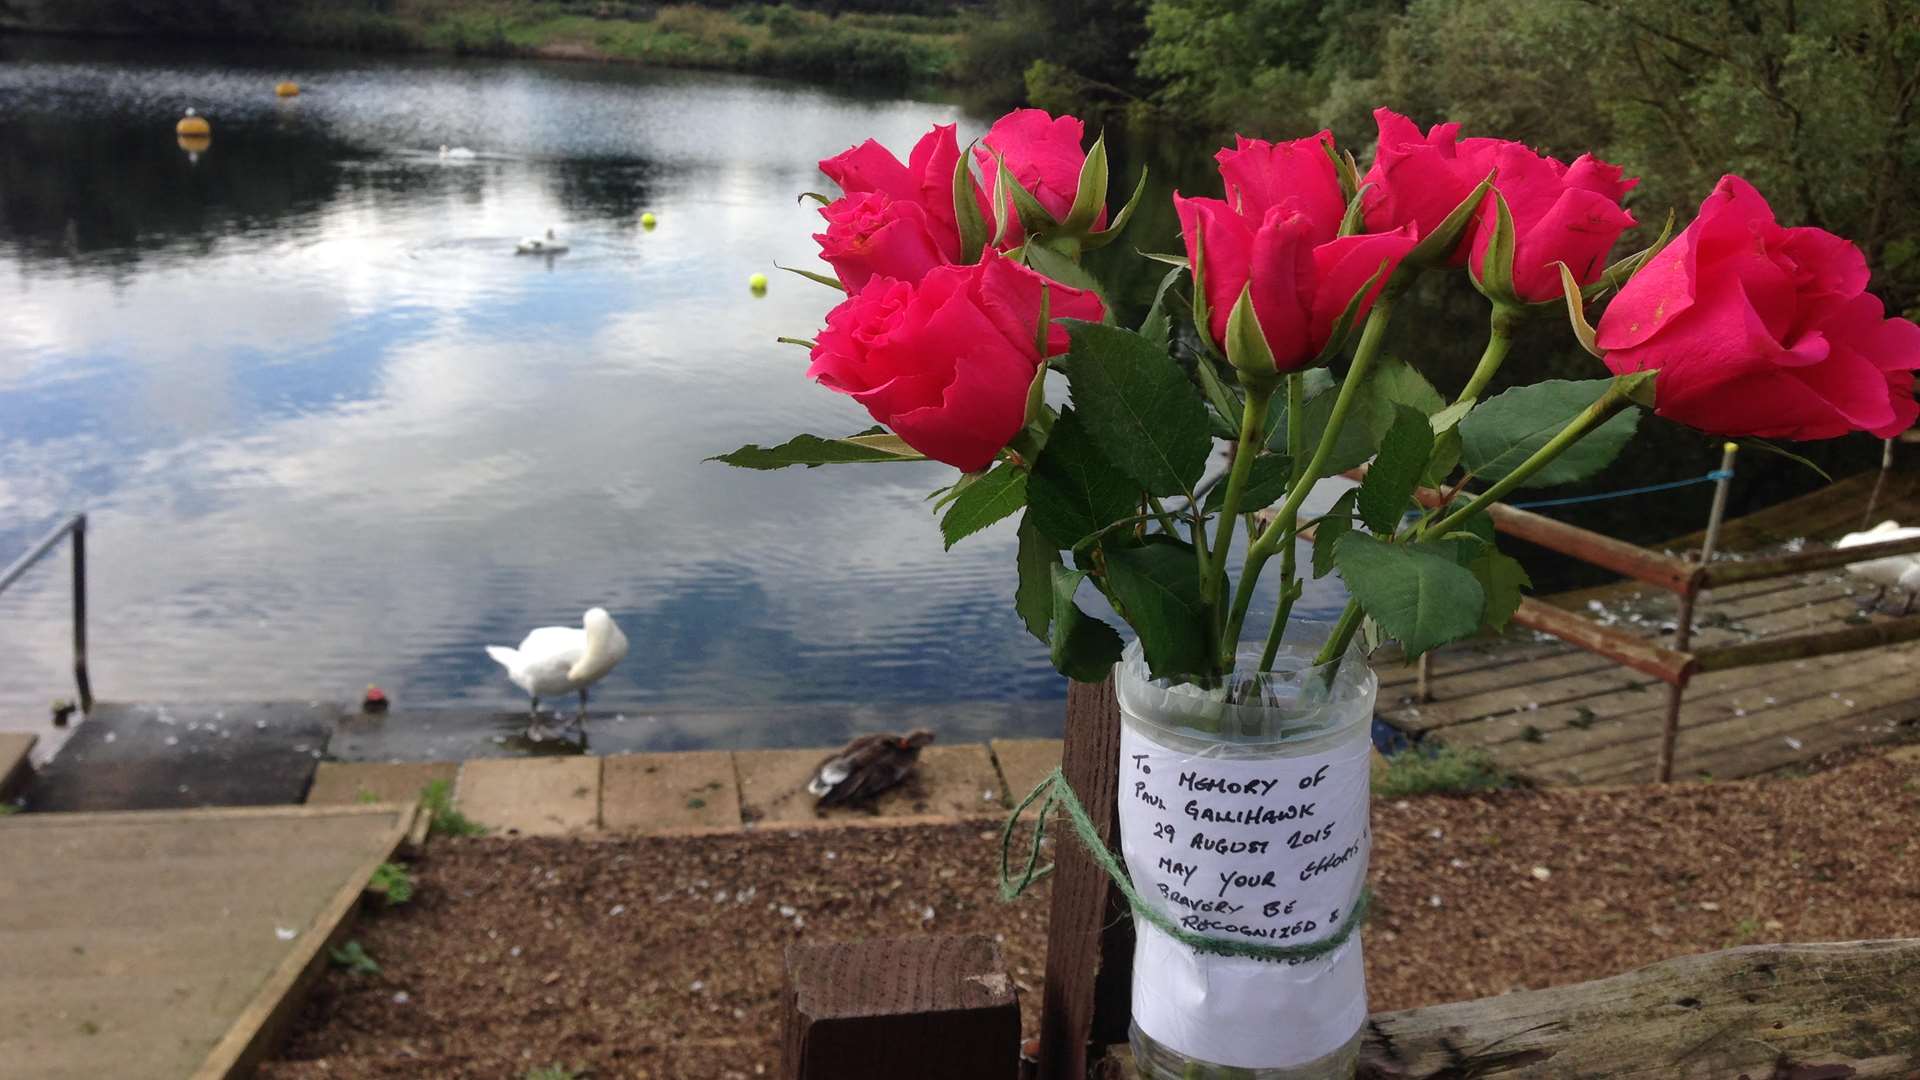 One of the floral tributes at the lake